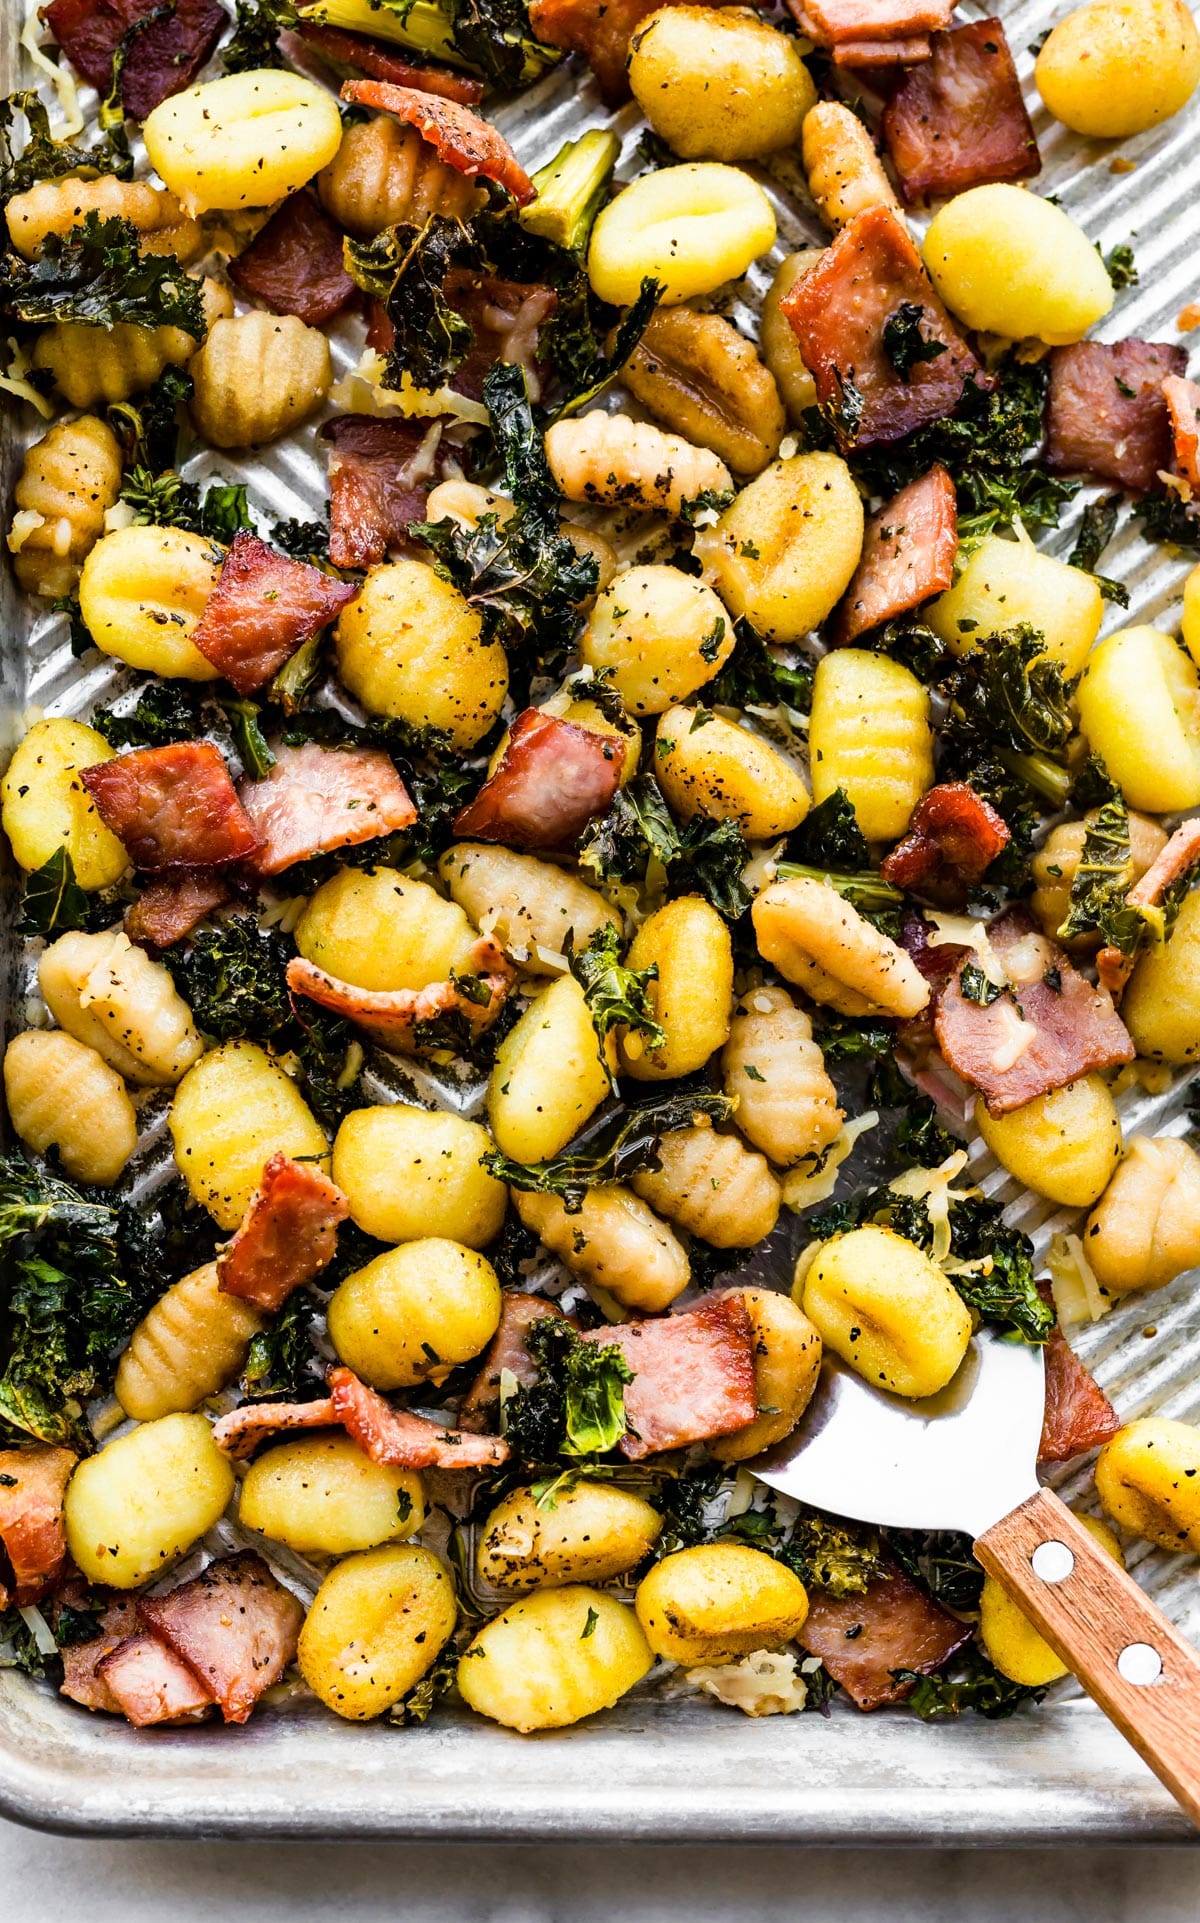 A sheet pan with gluten-free bake gnocchi, bacon, and kale.